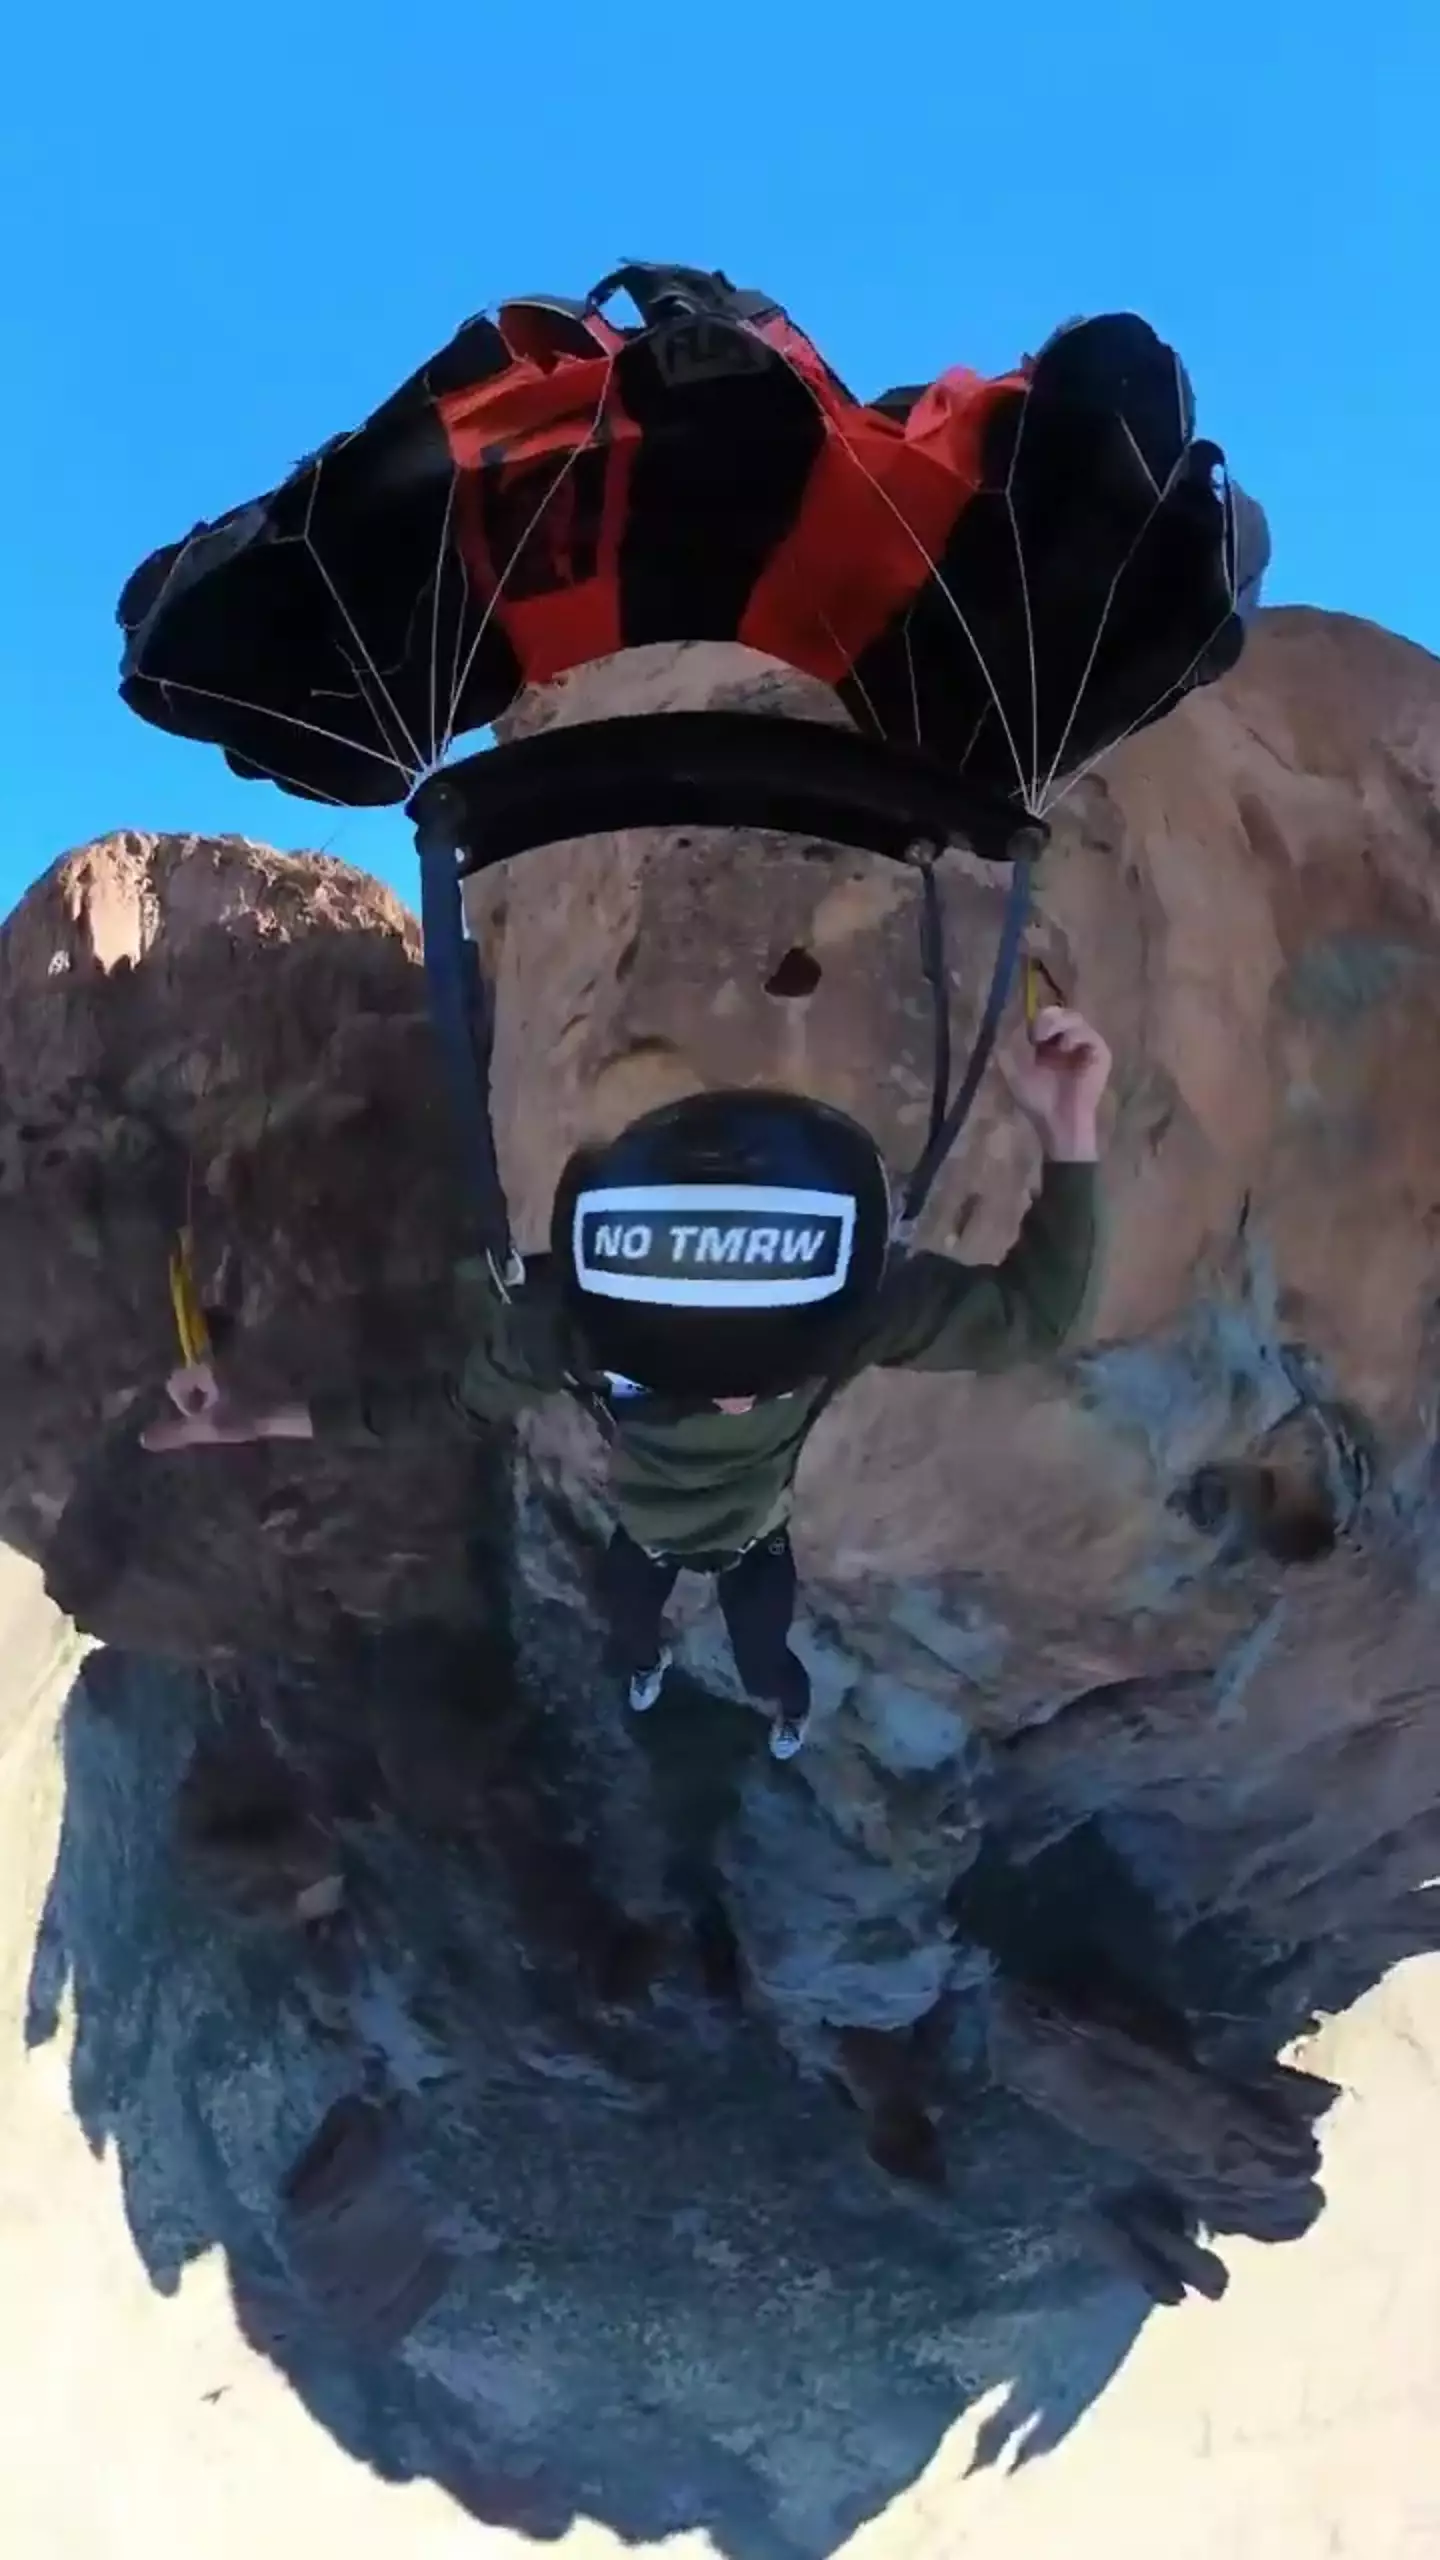 Things took a turn for the worse when Johnni DiJulius's parachute ripped.